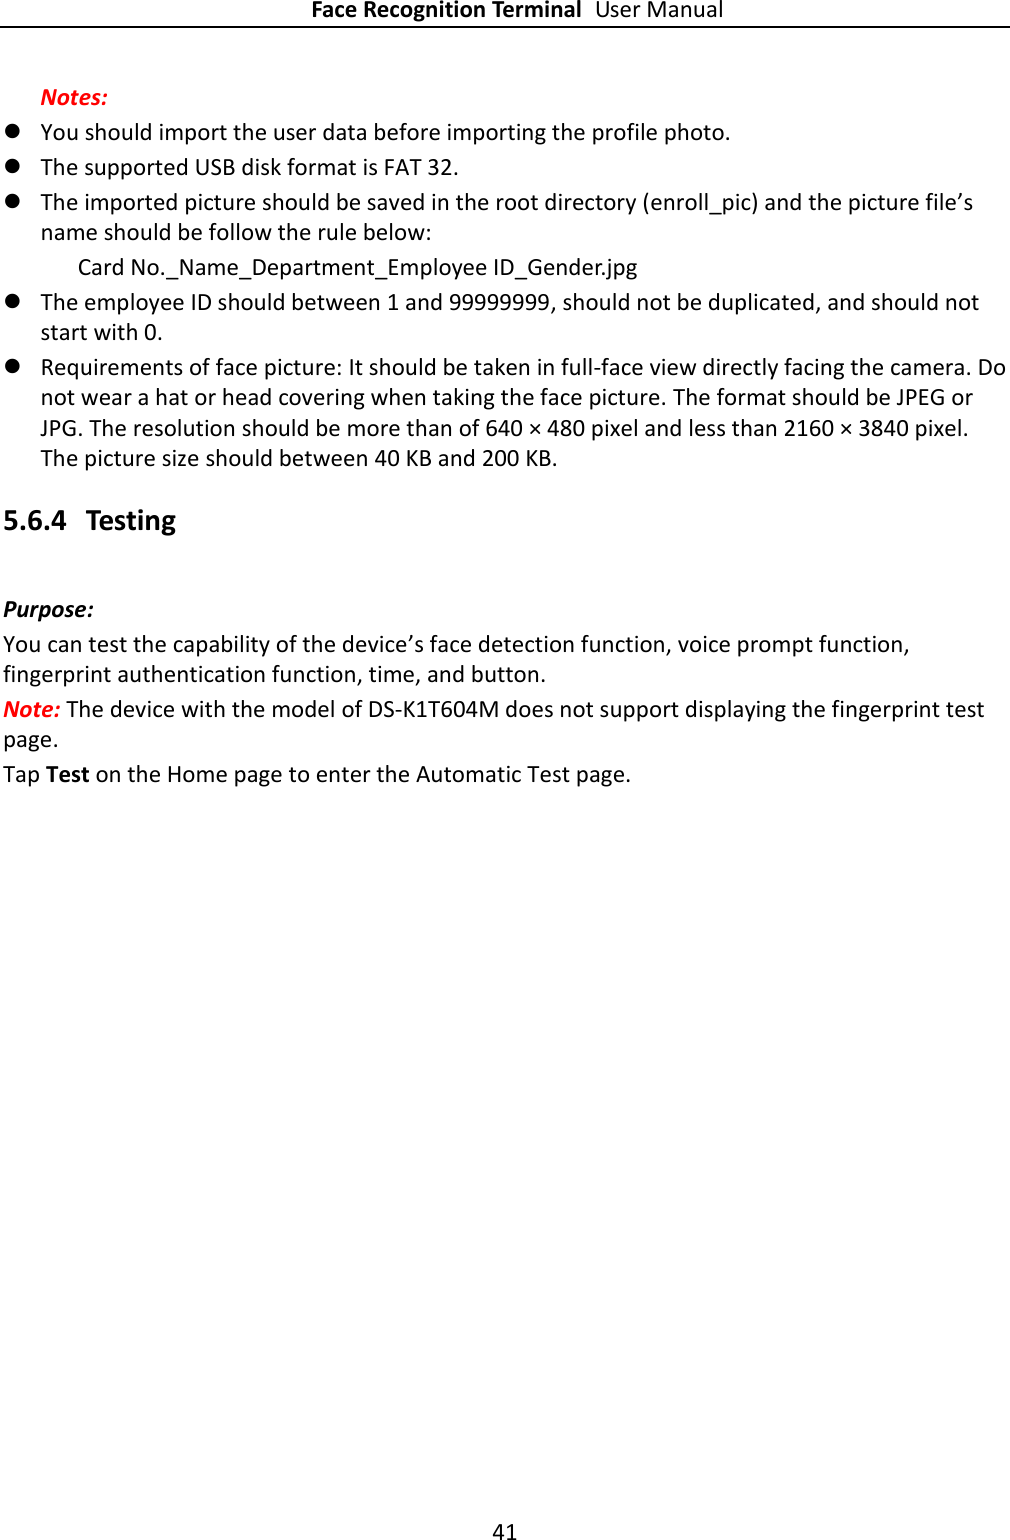 Page 41 of Hangzhou Hikvision Digital Technology K1T604 Face Recognition Terminal User Manual 